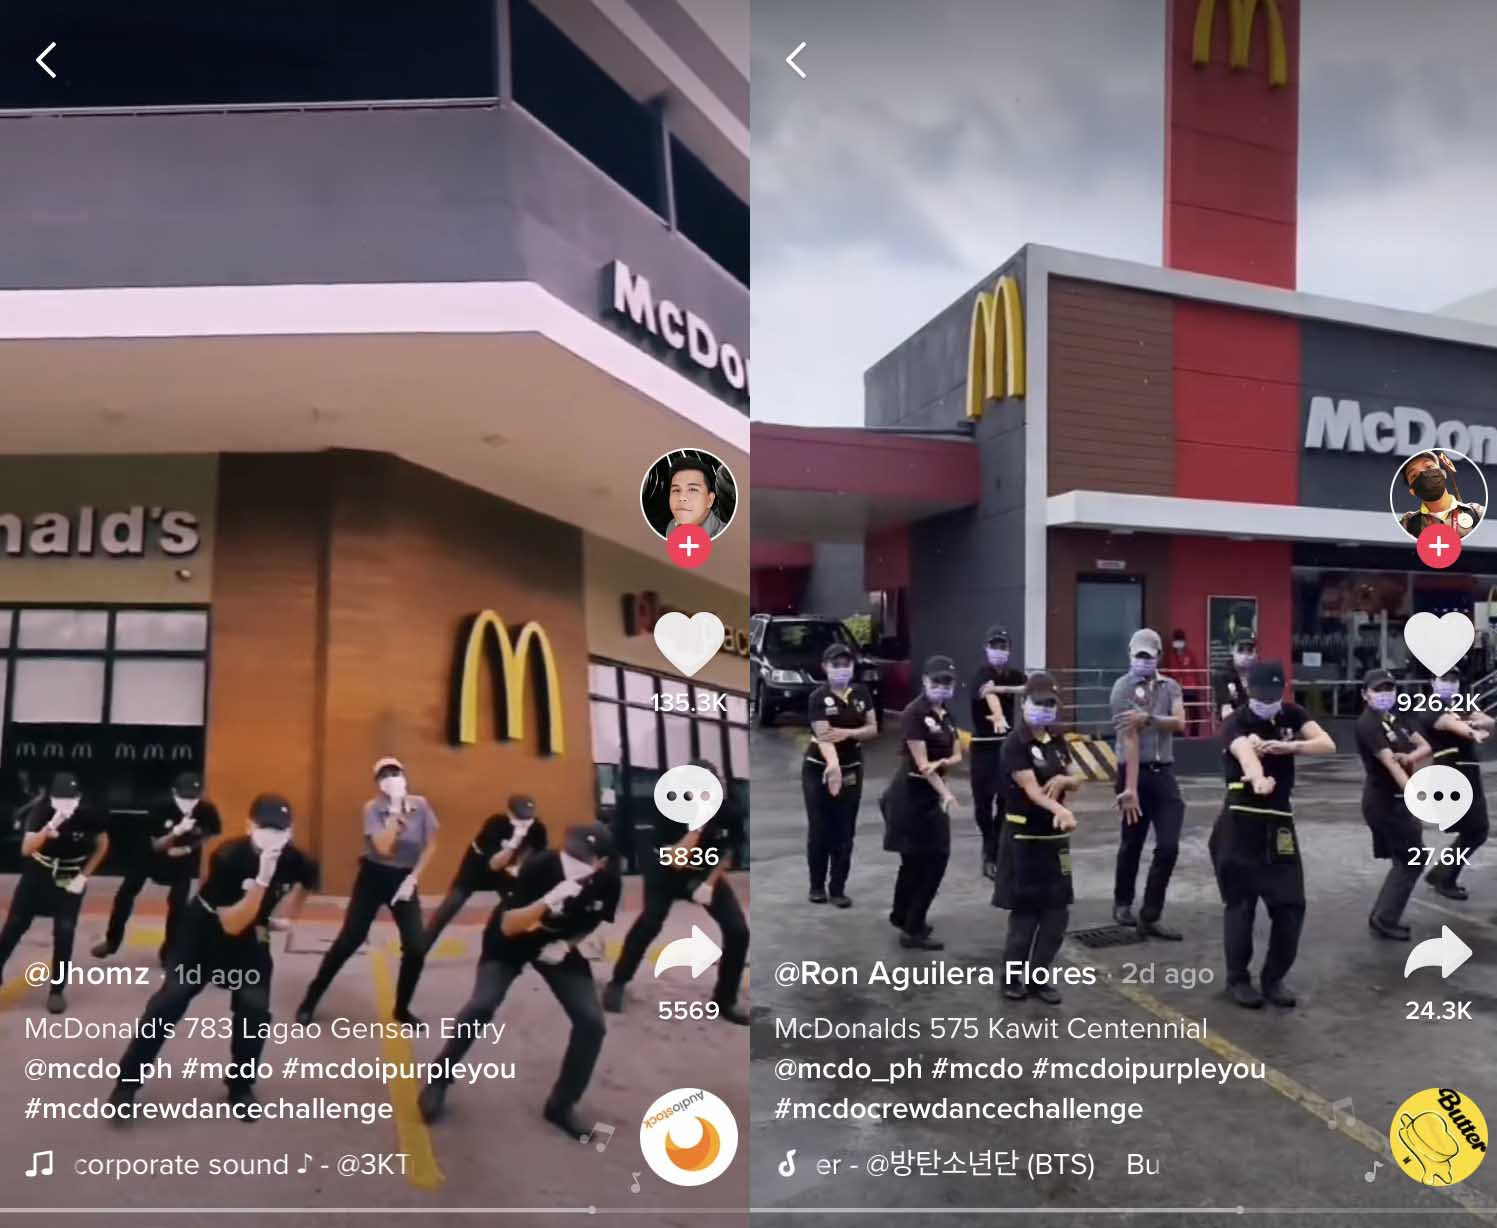 McDonald’s Philippines launches a #McDoCrewDanceChallenge to show off their dance moves that are smooth like butter!